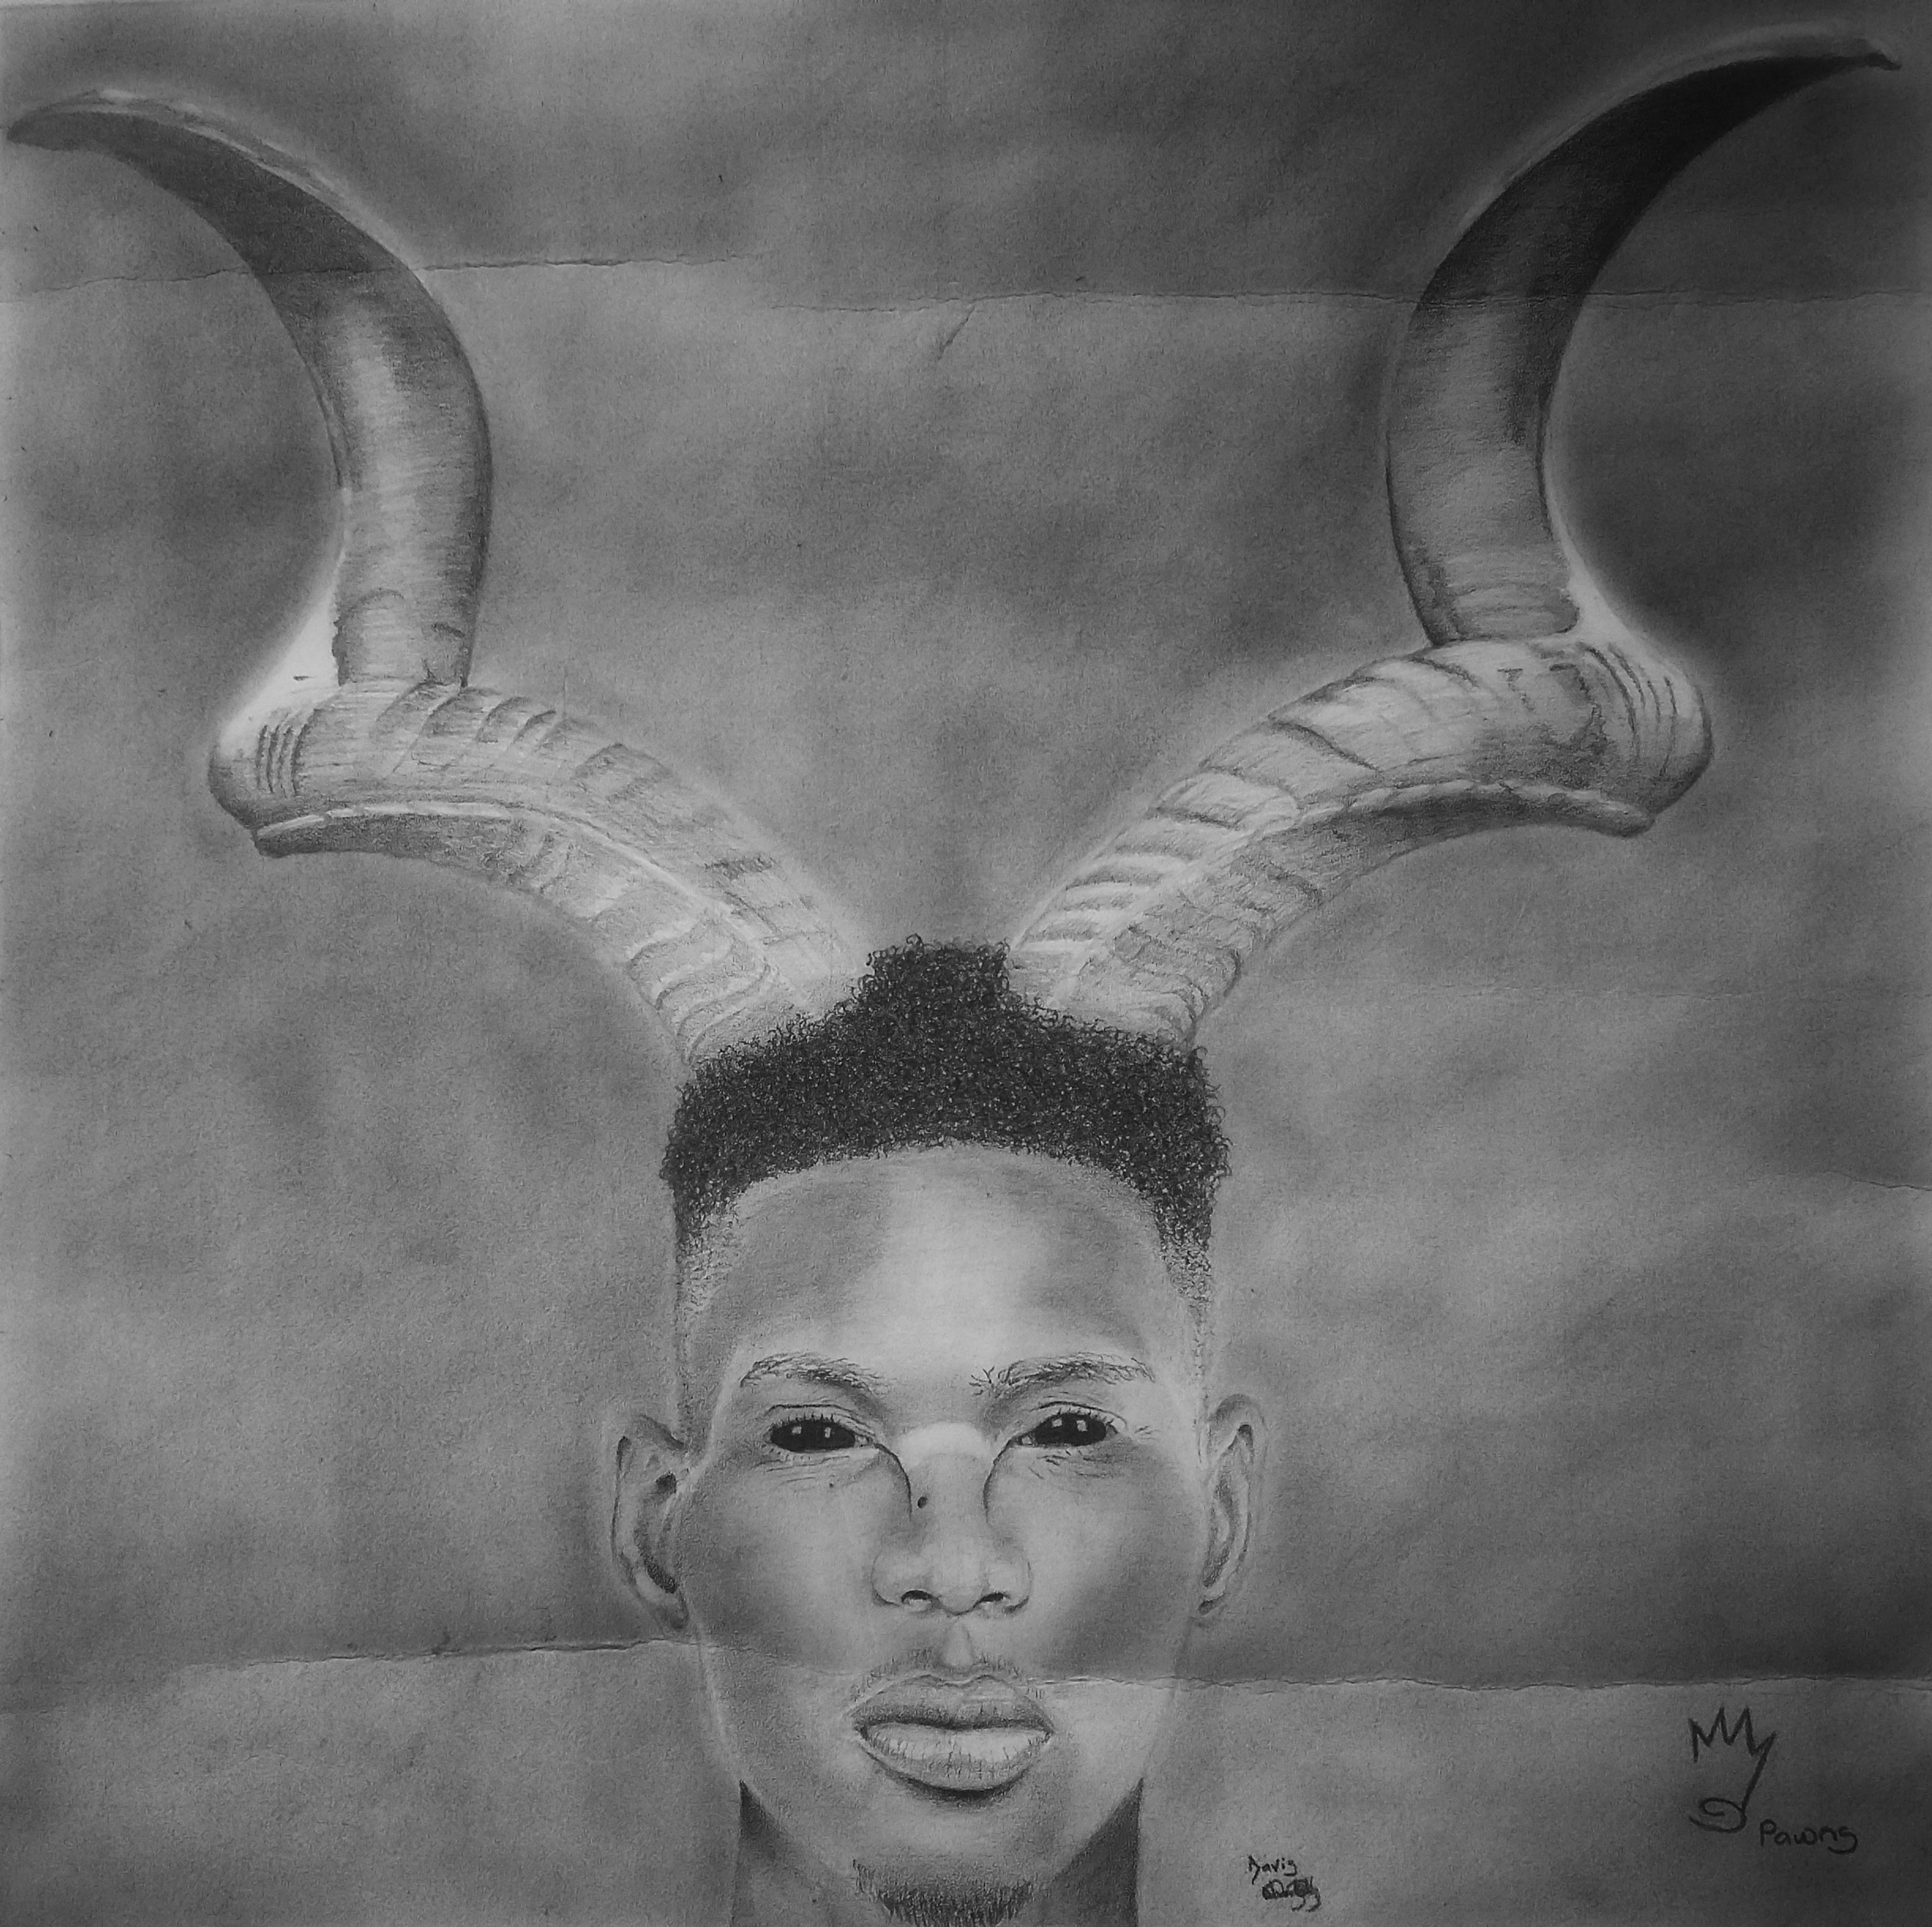 This is an Art work. A sketch of Dick David with horns
